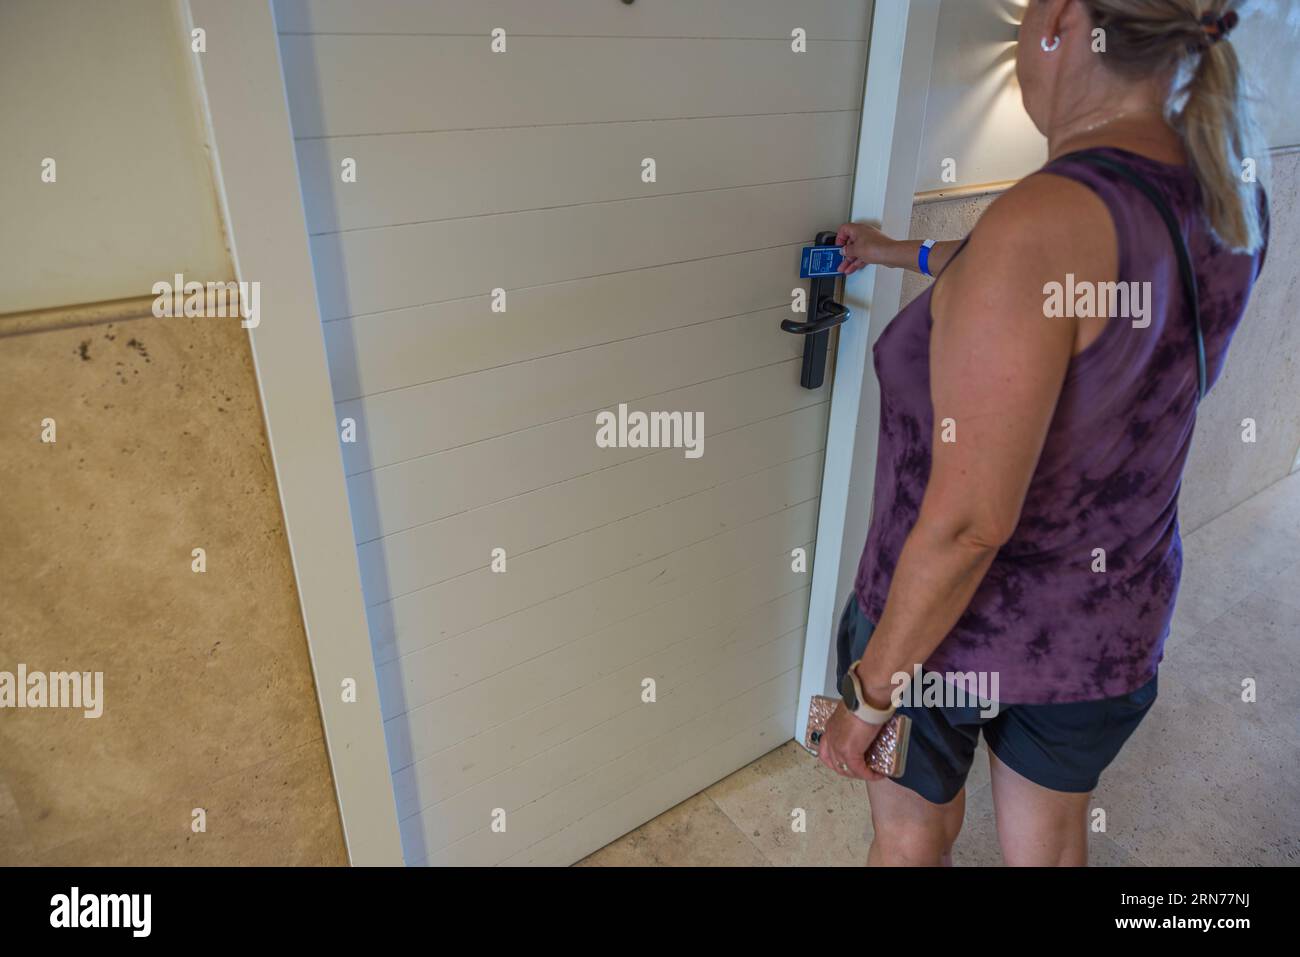 Close-up view of woman opening electric lock of front door with key card in hotel room. Willemstad. Curacao. Stock Photo